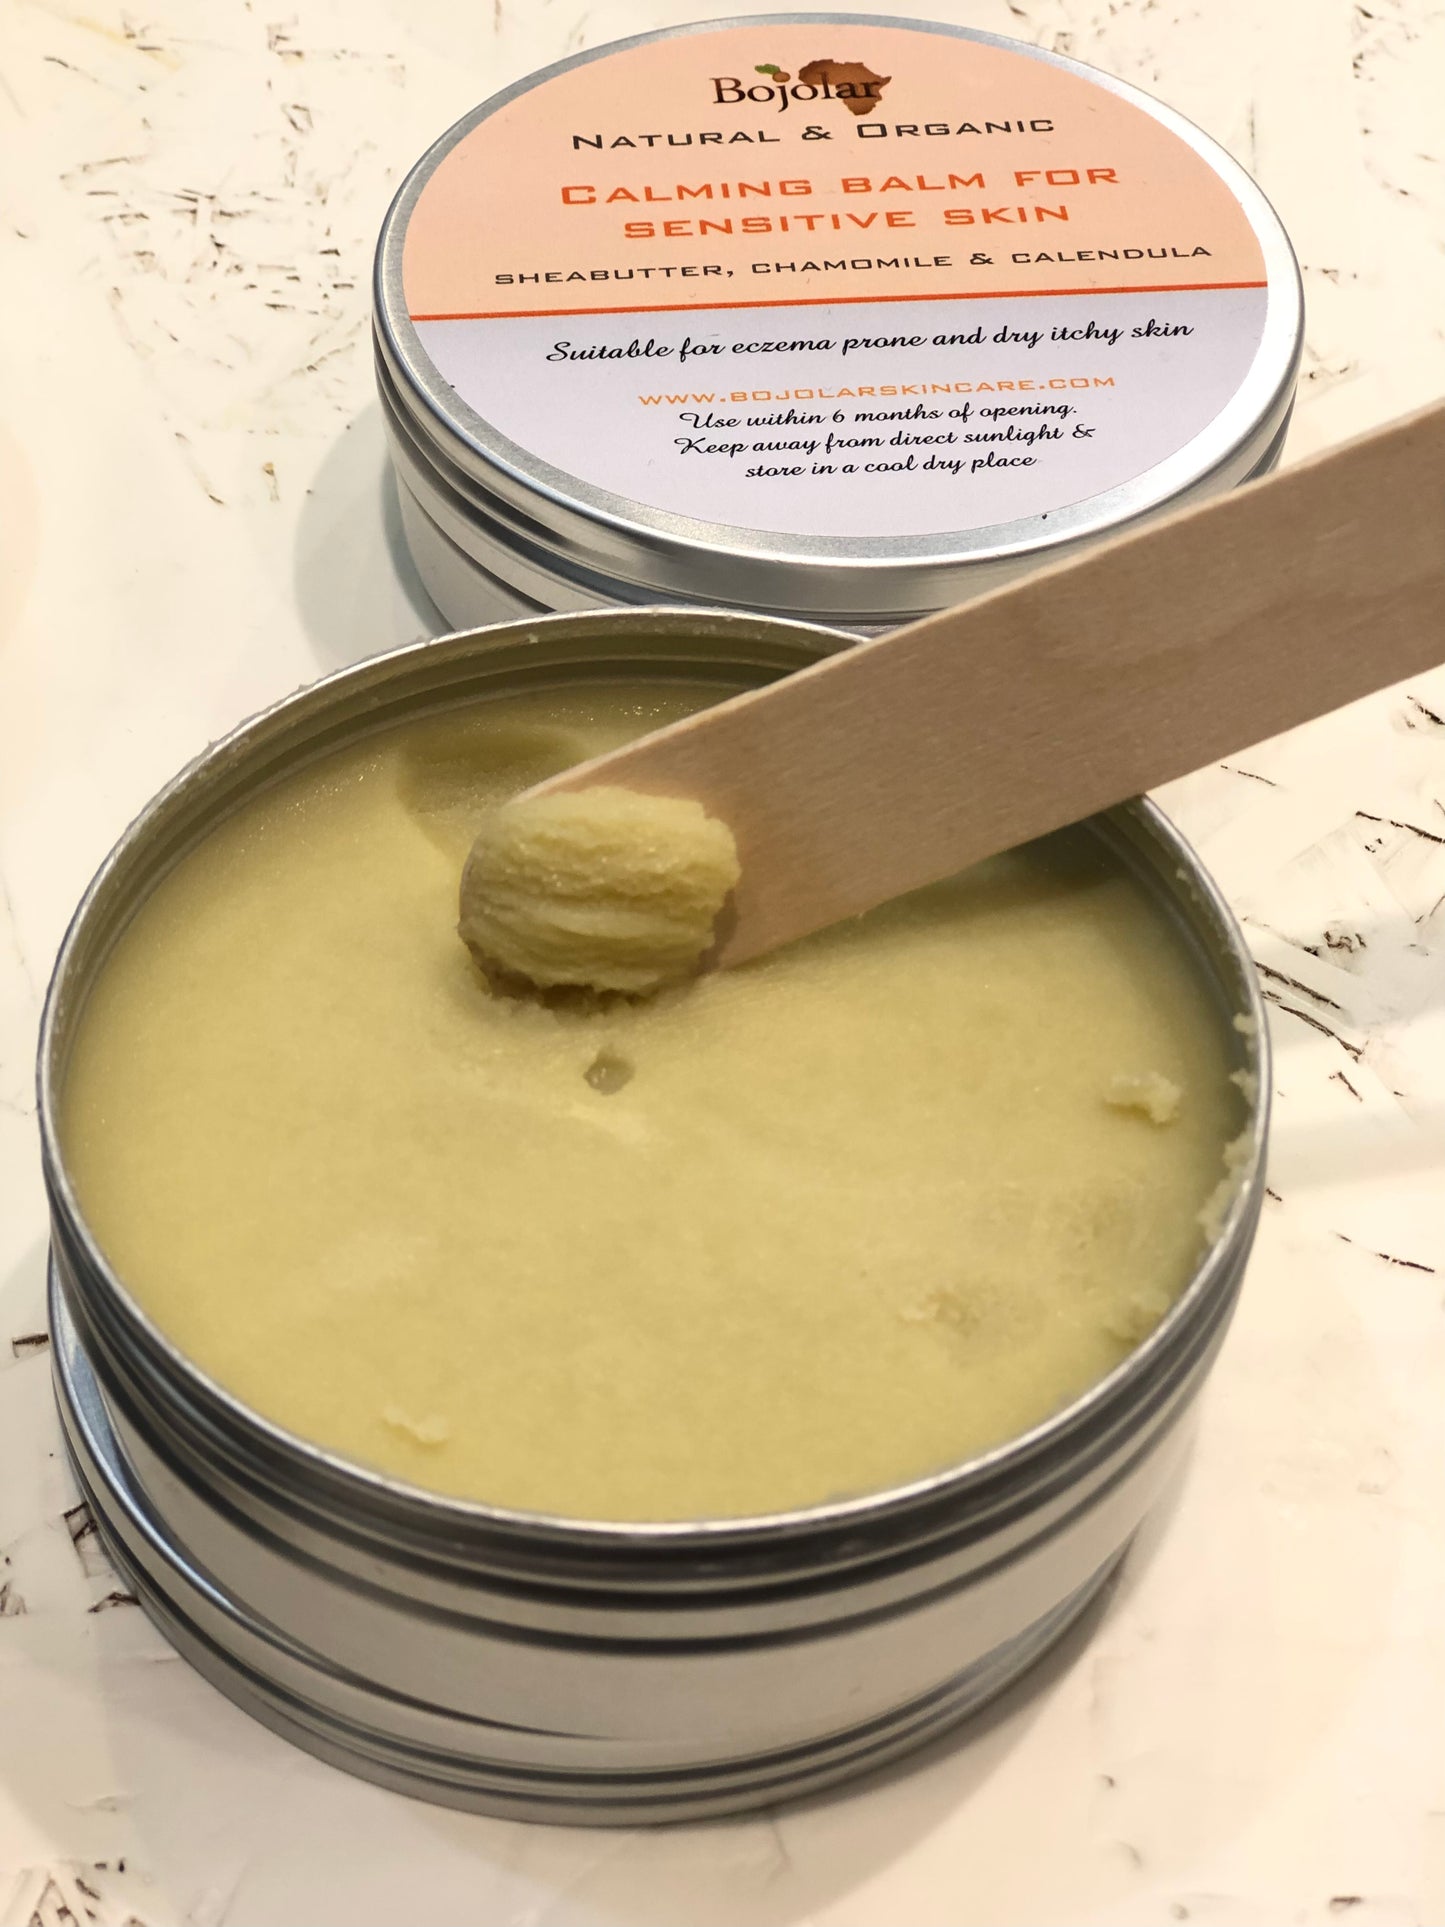 Calming balm with chamomile